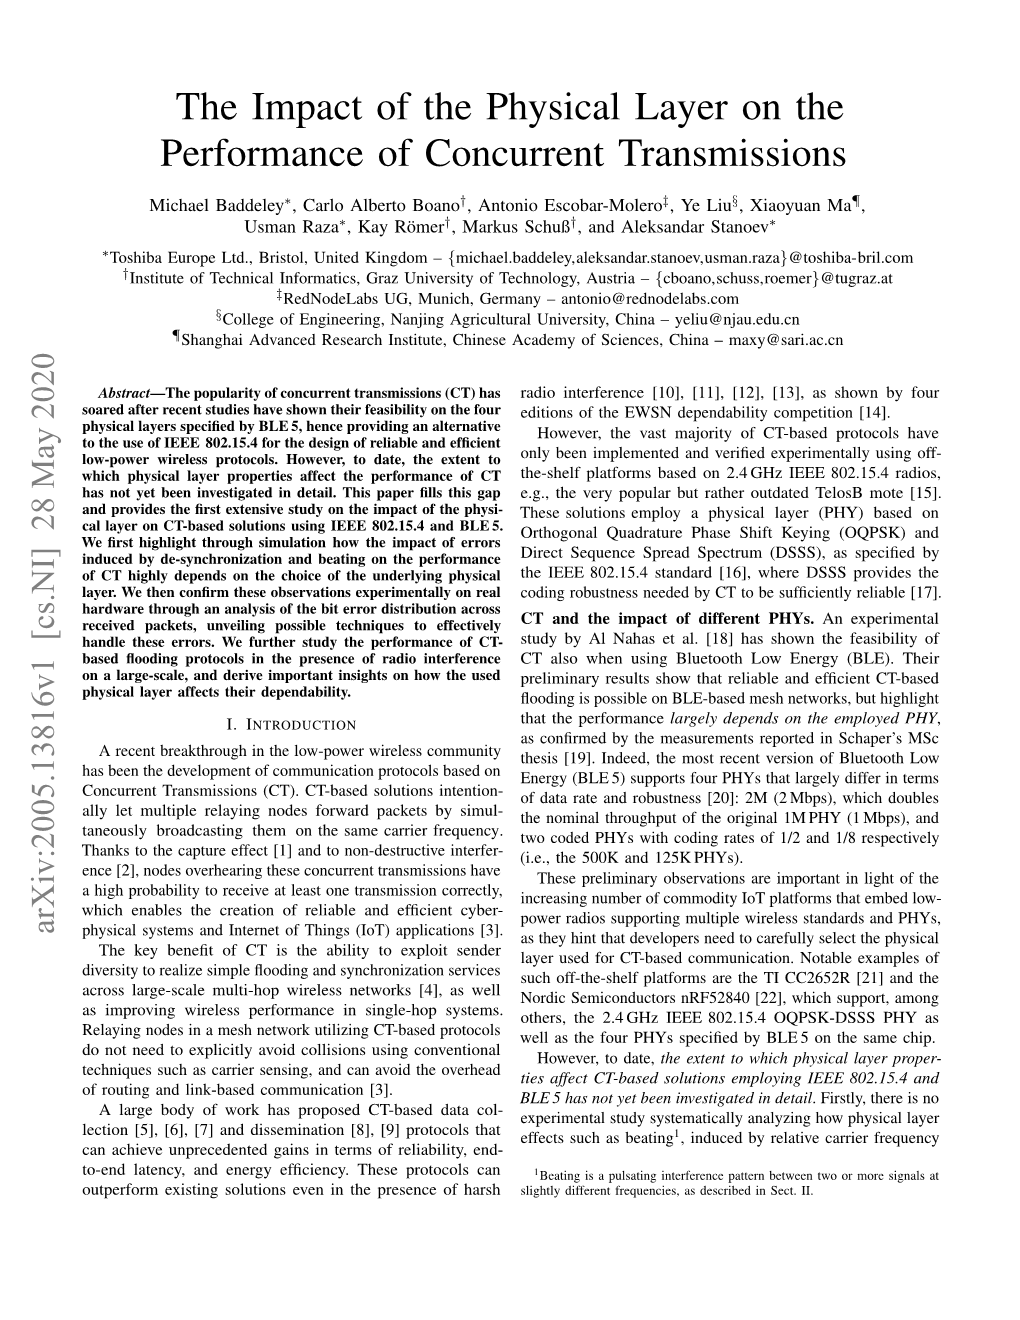 The Impact of the Physical Layer on the Performance of Concurrent Transmissions